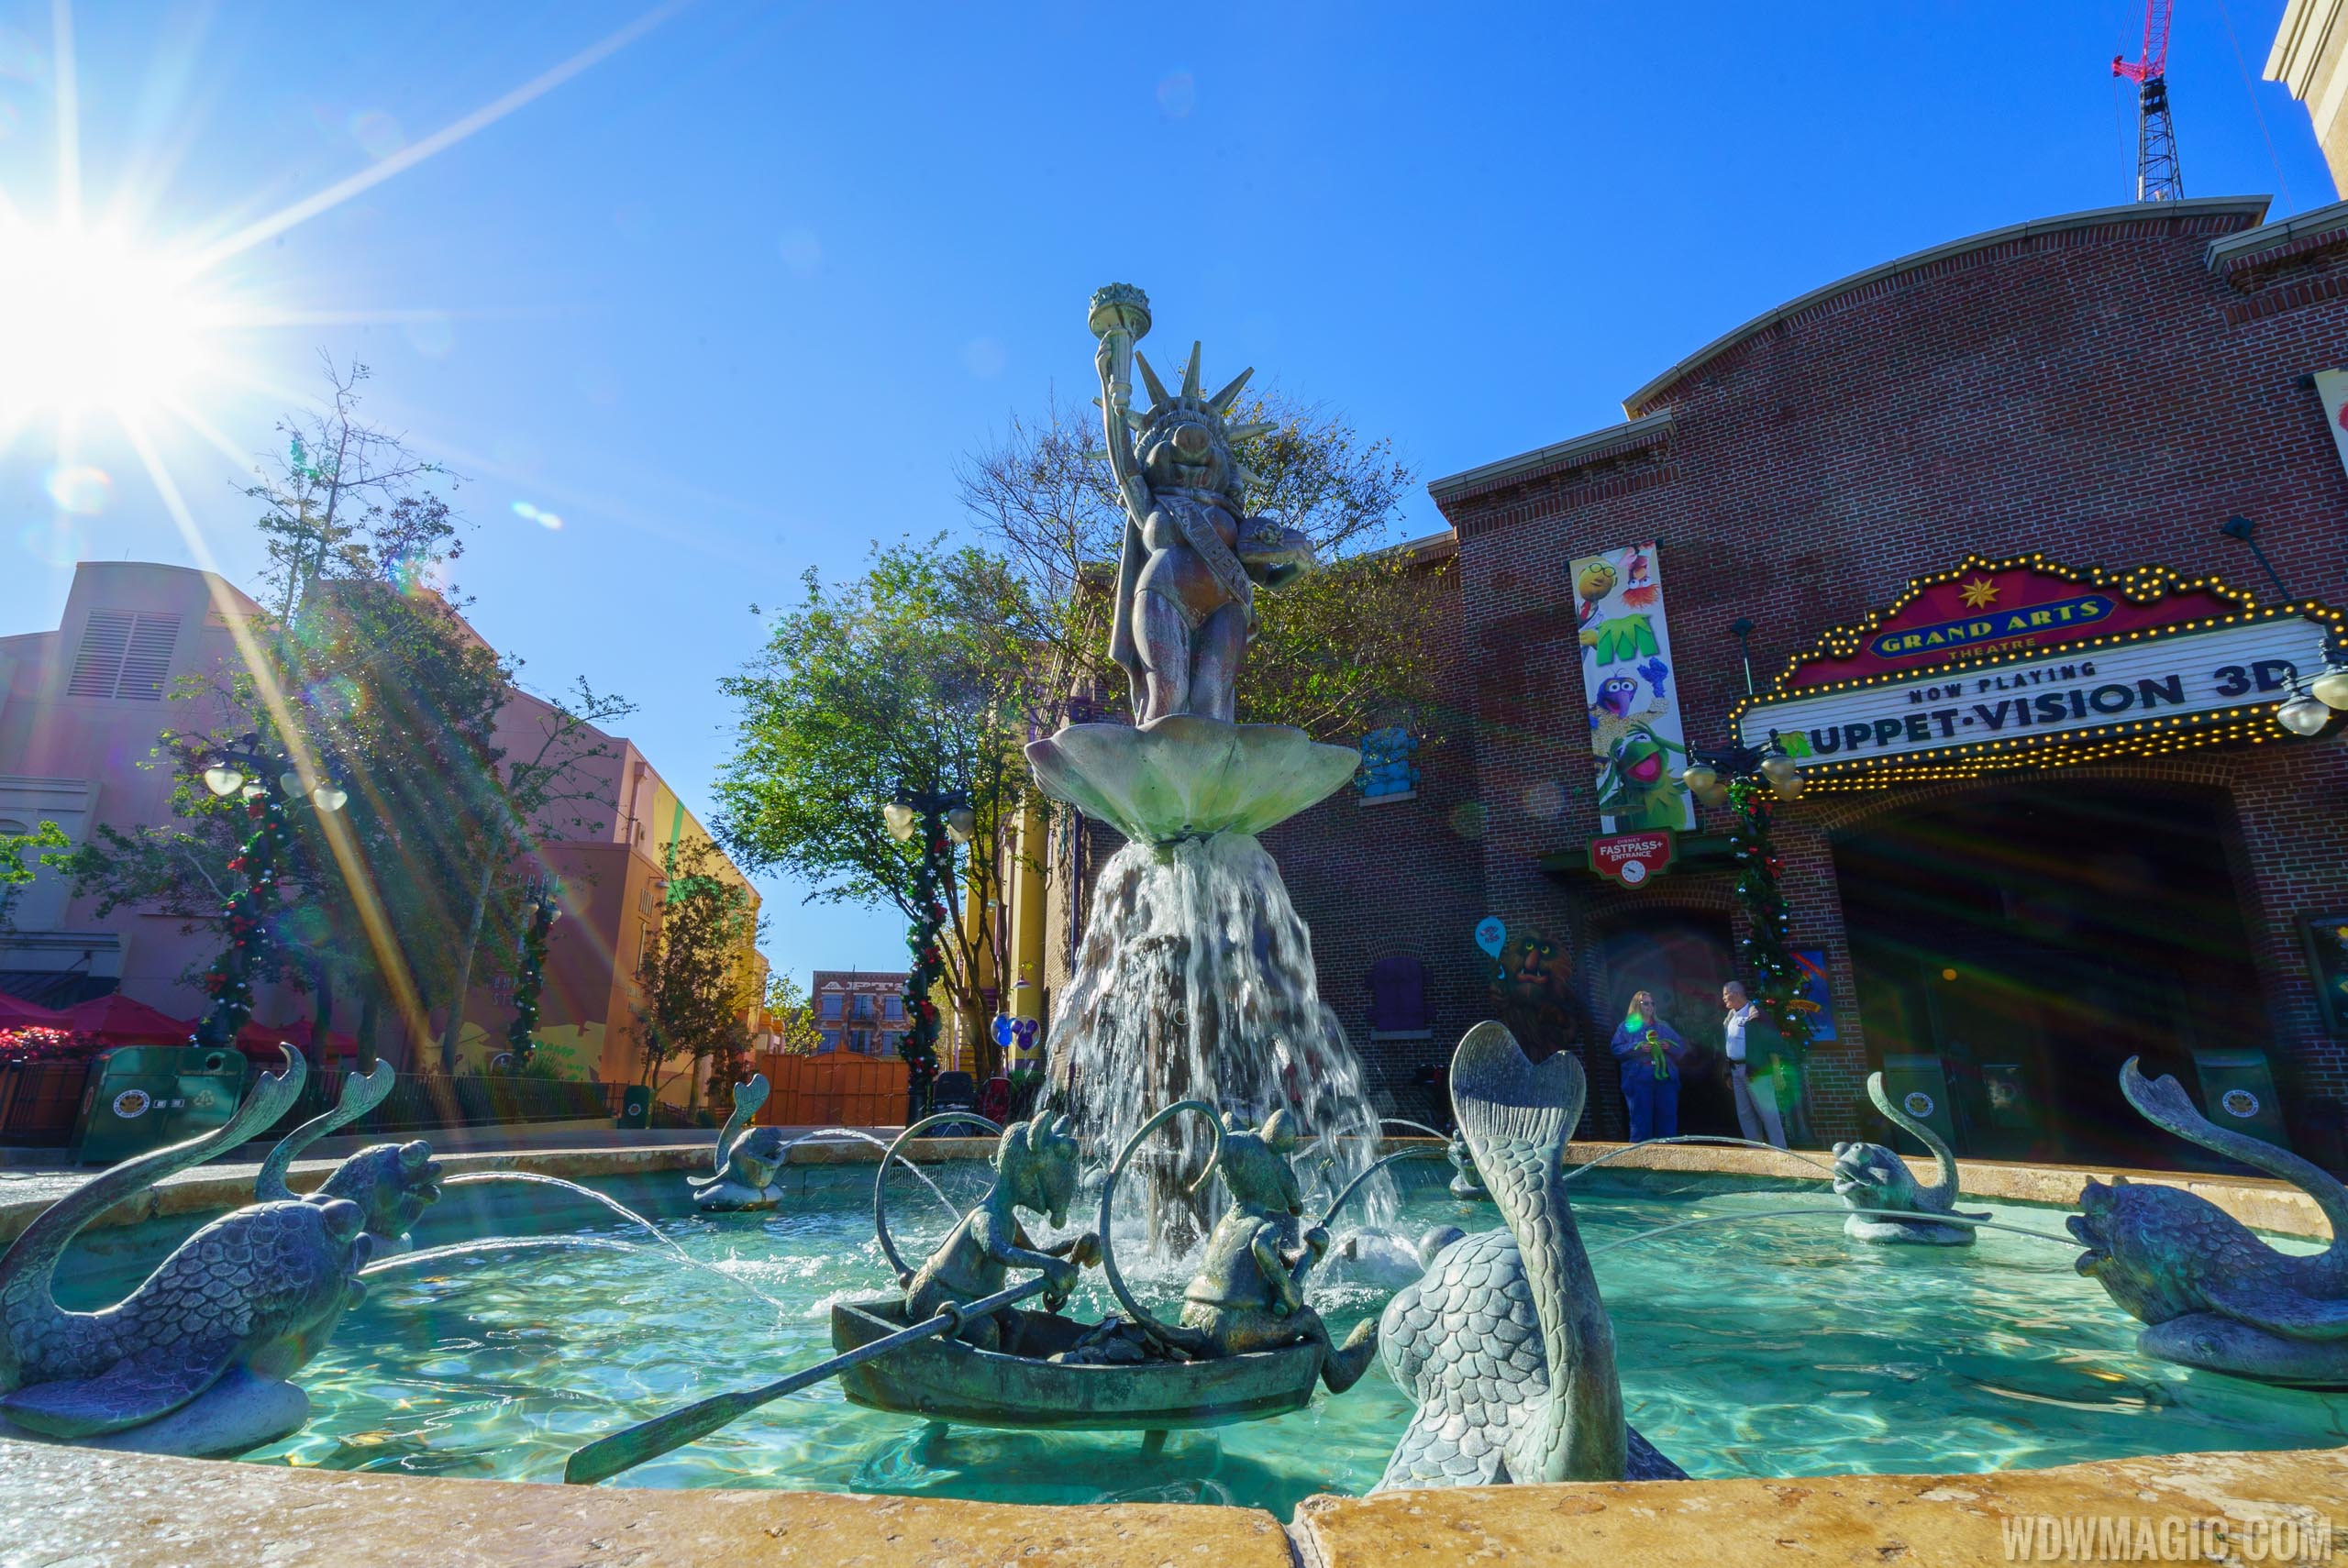 PHOTOS - Muppets Fountain returns to Grand Avenue at Disney's Hollywood